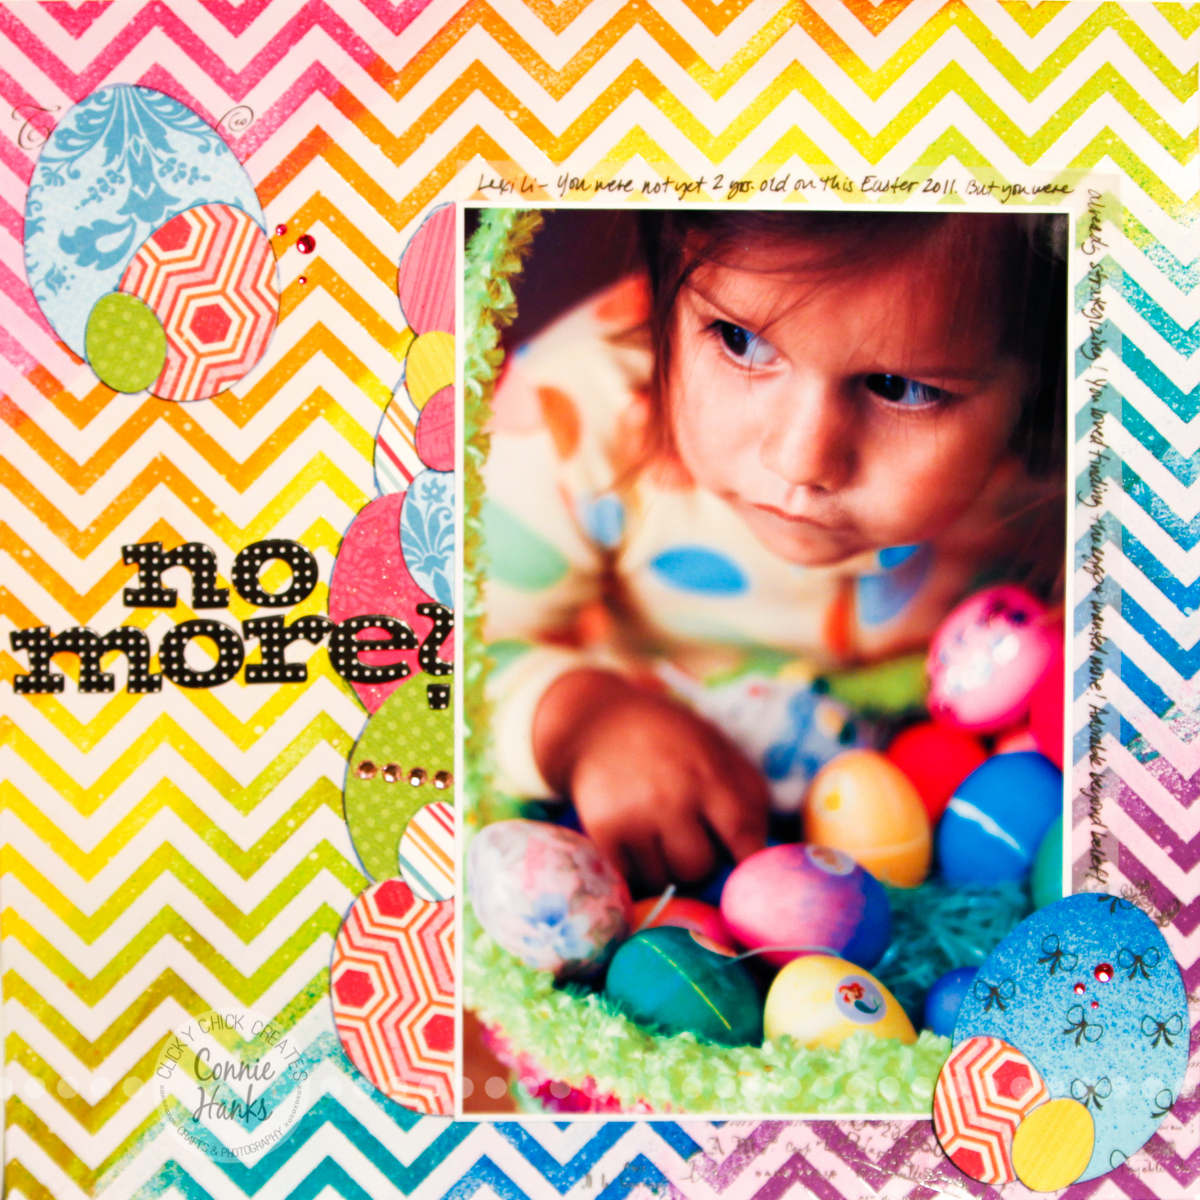 Connie Hanks Photography // ClickyChickCreates.com // No More? Easter scrapbook layout using Heidi Swapp color magic paper, Dylusions Spray Inks, Slice Elite cutting tool